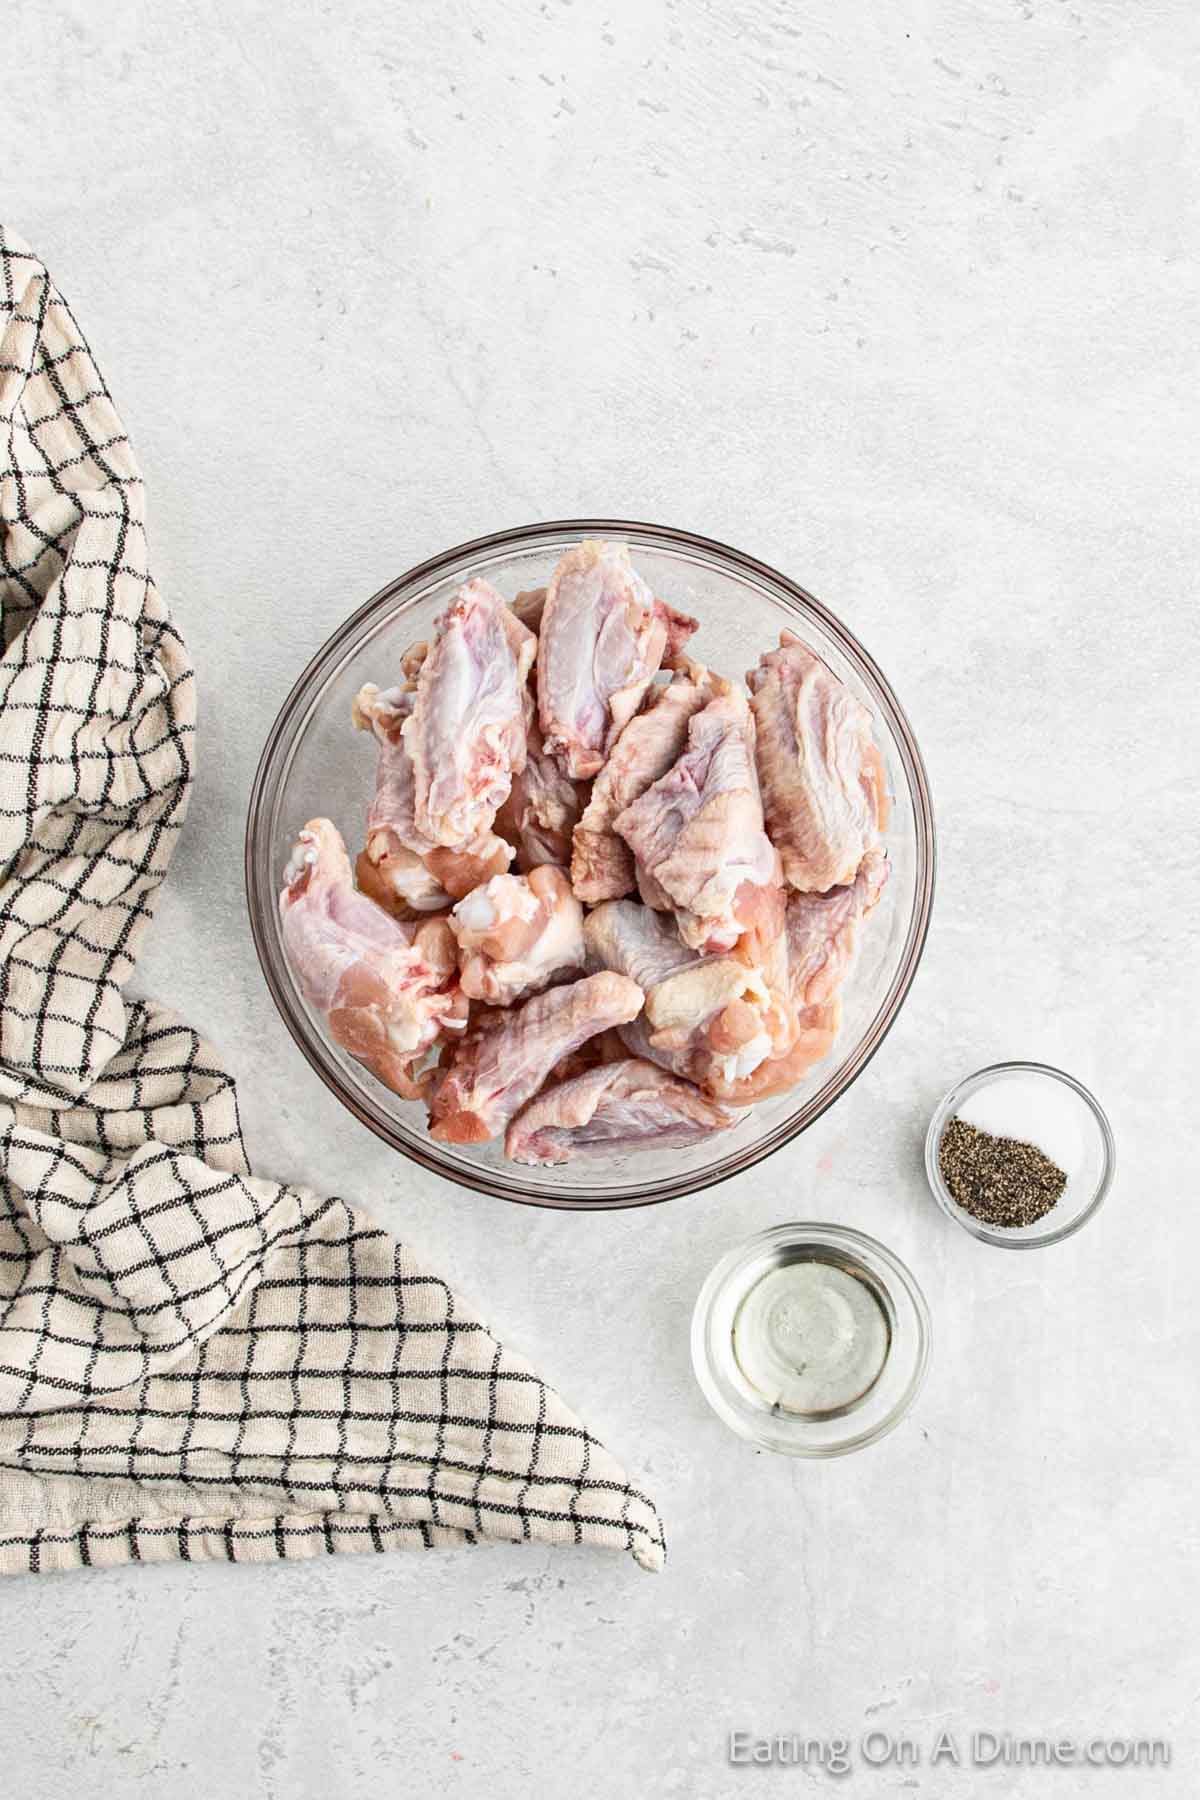 Uncooked chicken wings in a bowl with small bowls of oil and salt and pepper